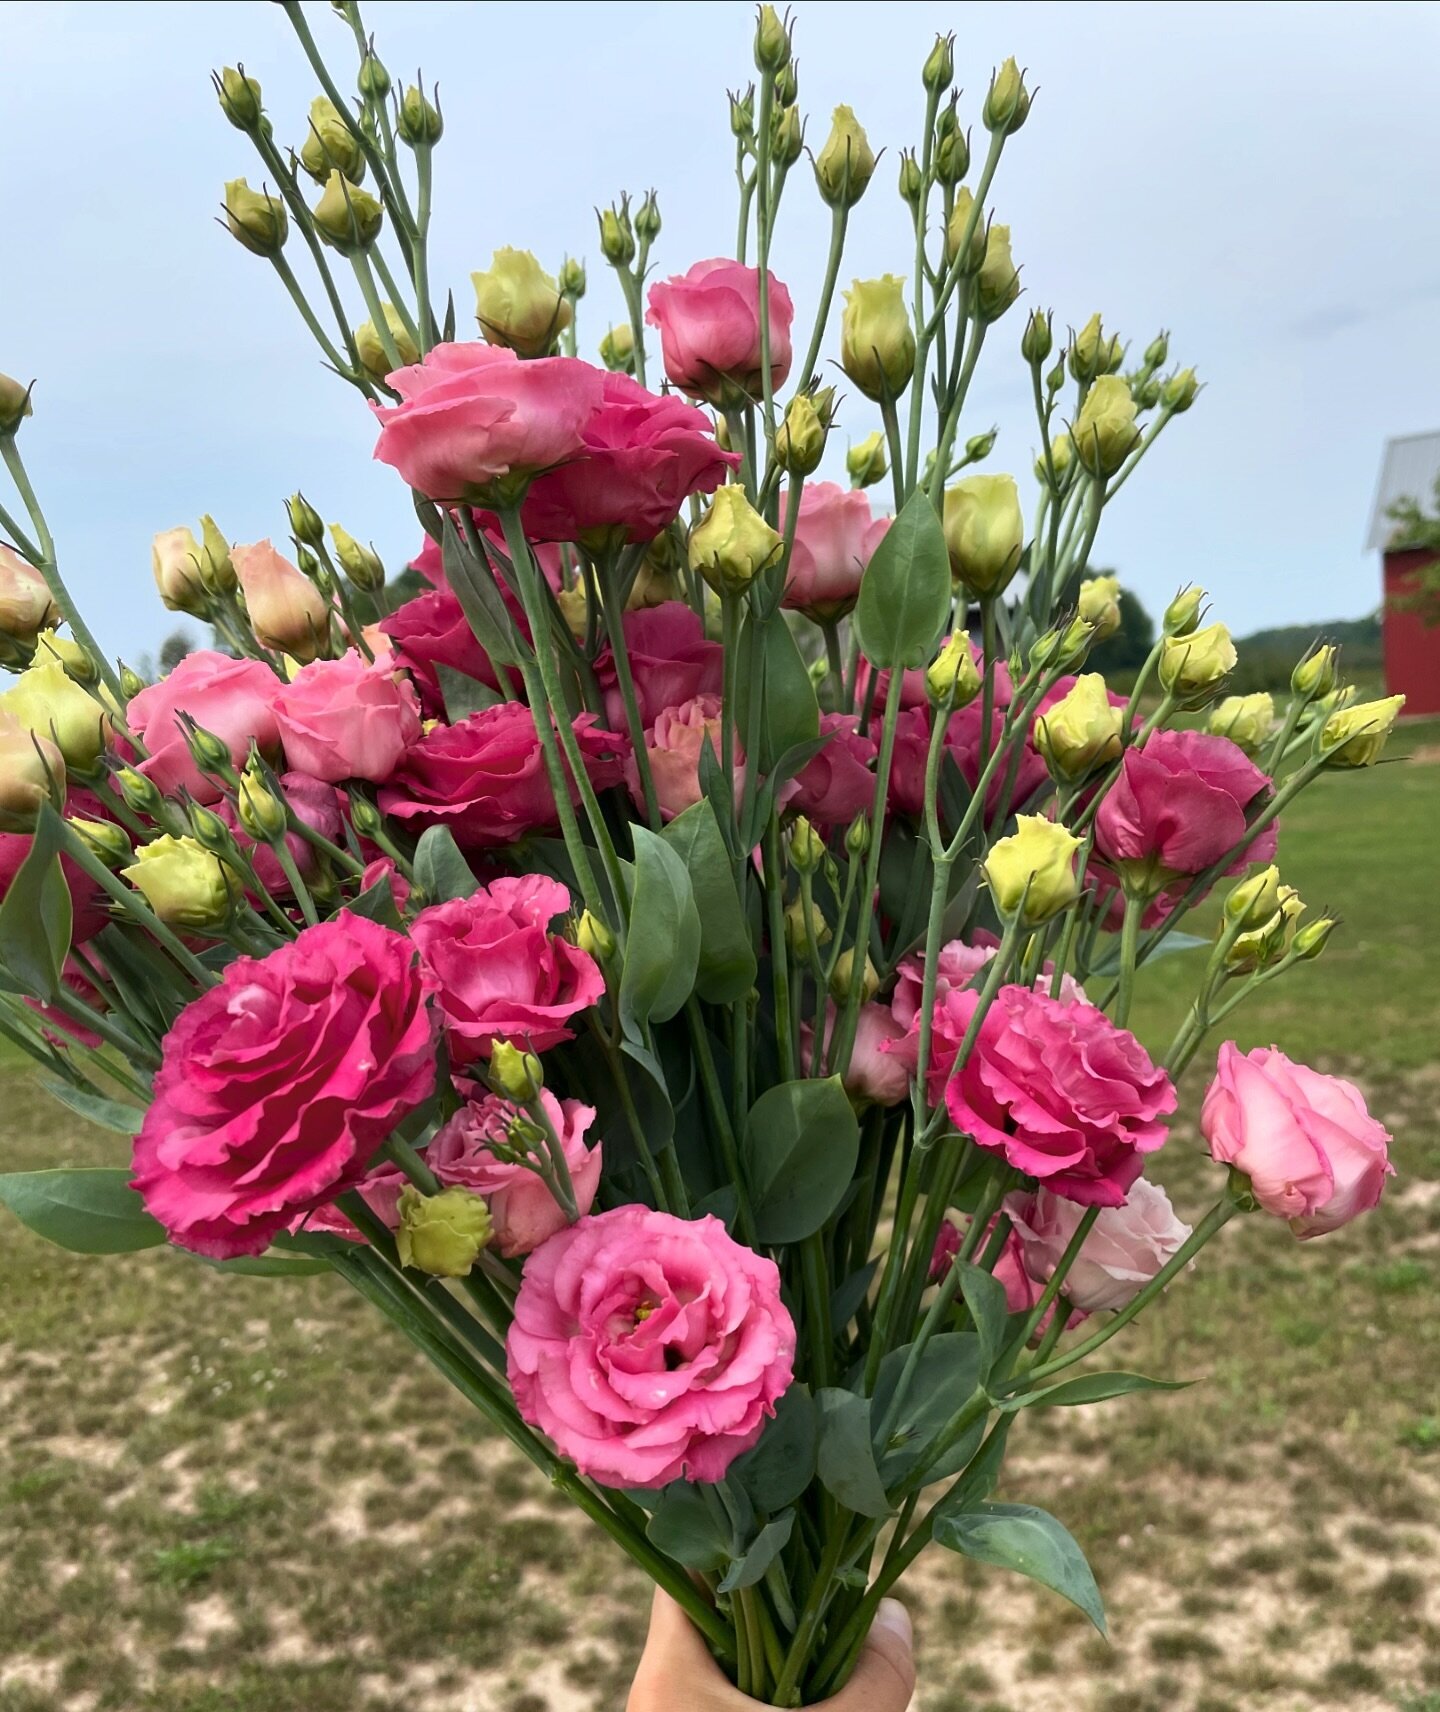 Spring Checklist: Here&rsquo;s what happening on the farm lately. 

✔️ Ranunculus planted and growing under protection. 
✔️ 3300+ Lisianthus, snapdragons, bupleurum, and Chinese forget me knot plugs planted. 
✔️ New tunnel halfway built. It&rsquo;s a